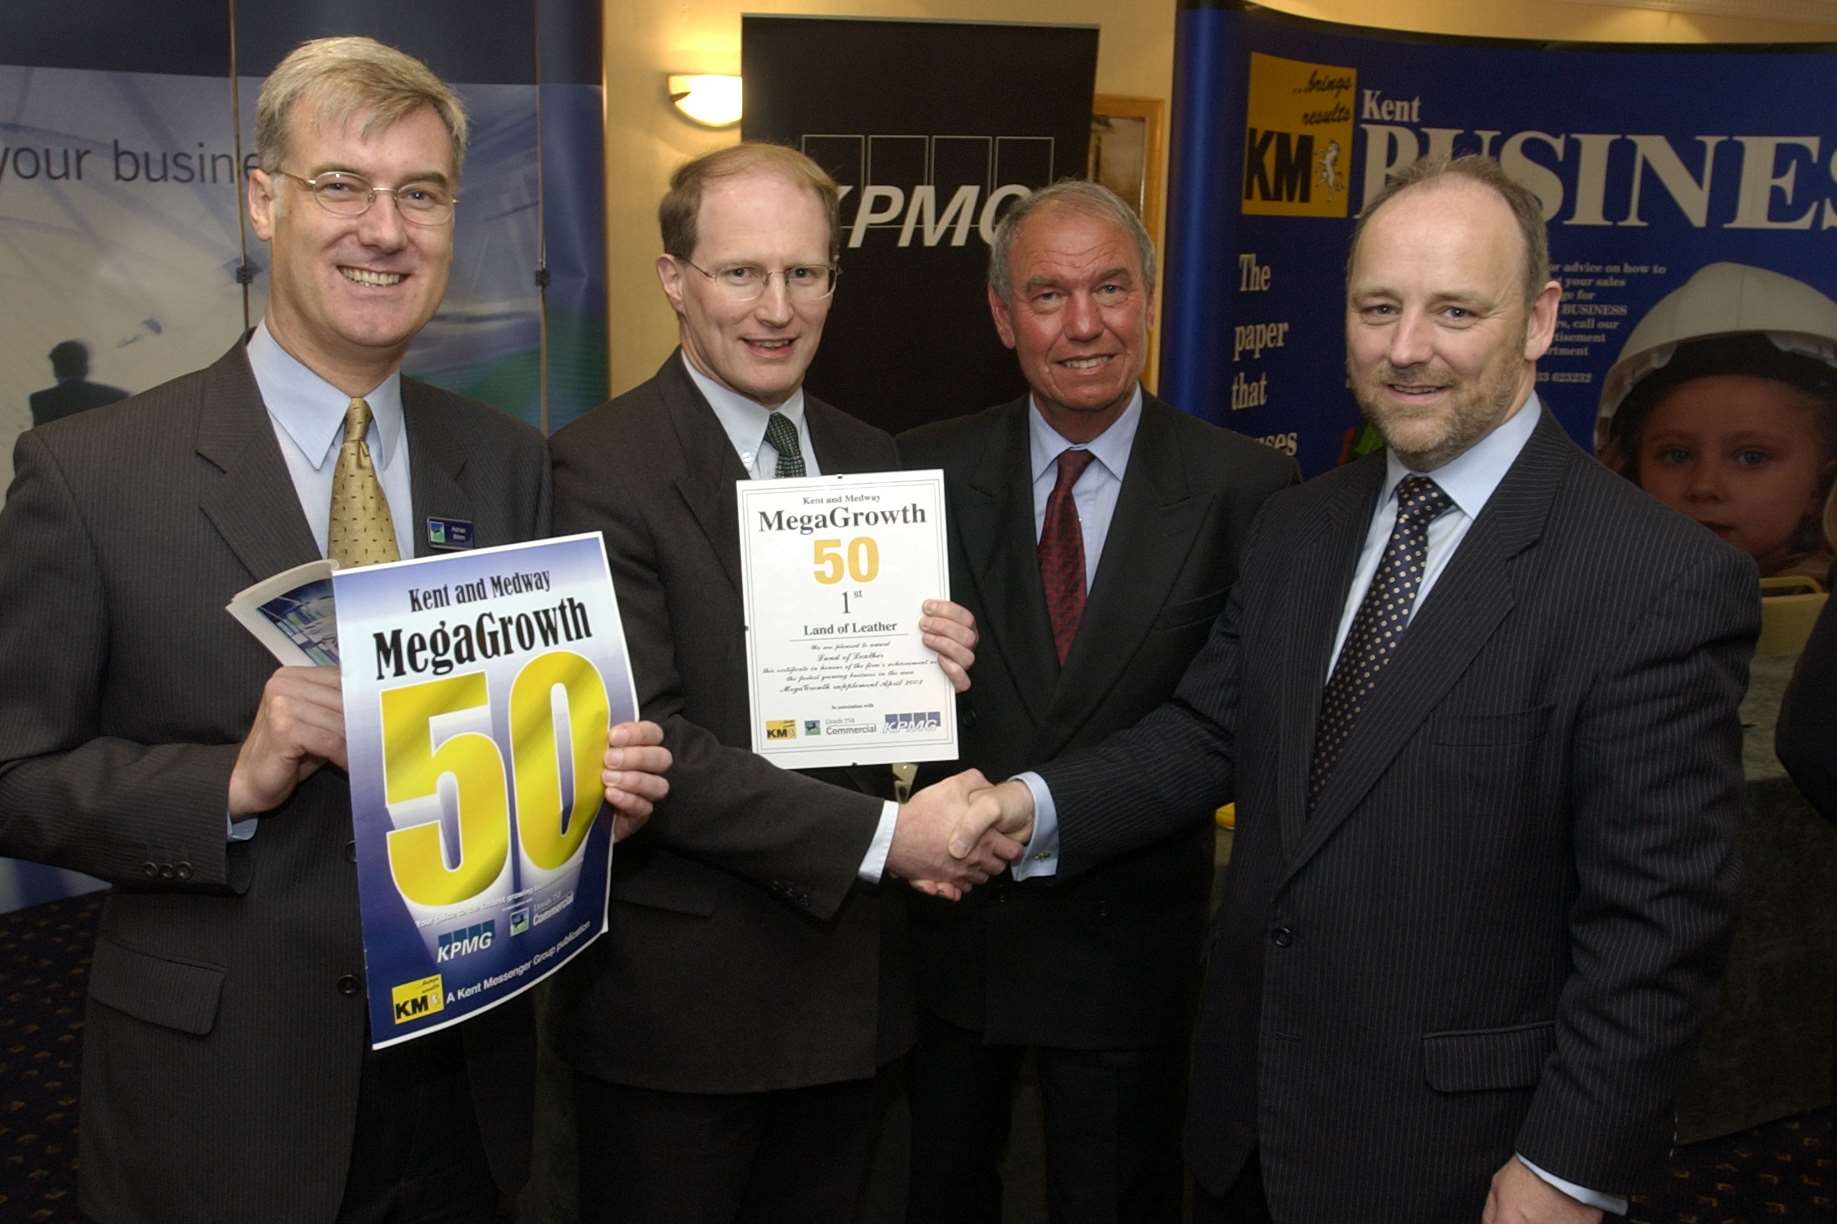 At the first MegaGrowth presentation, from left, Lloyds TSB development manager Adrian Wenn, Brian Neilly of Land of Leather, guest speaker Richard Scase and KPMG partner David Forge